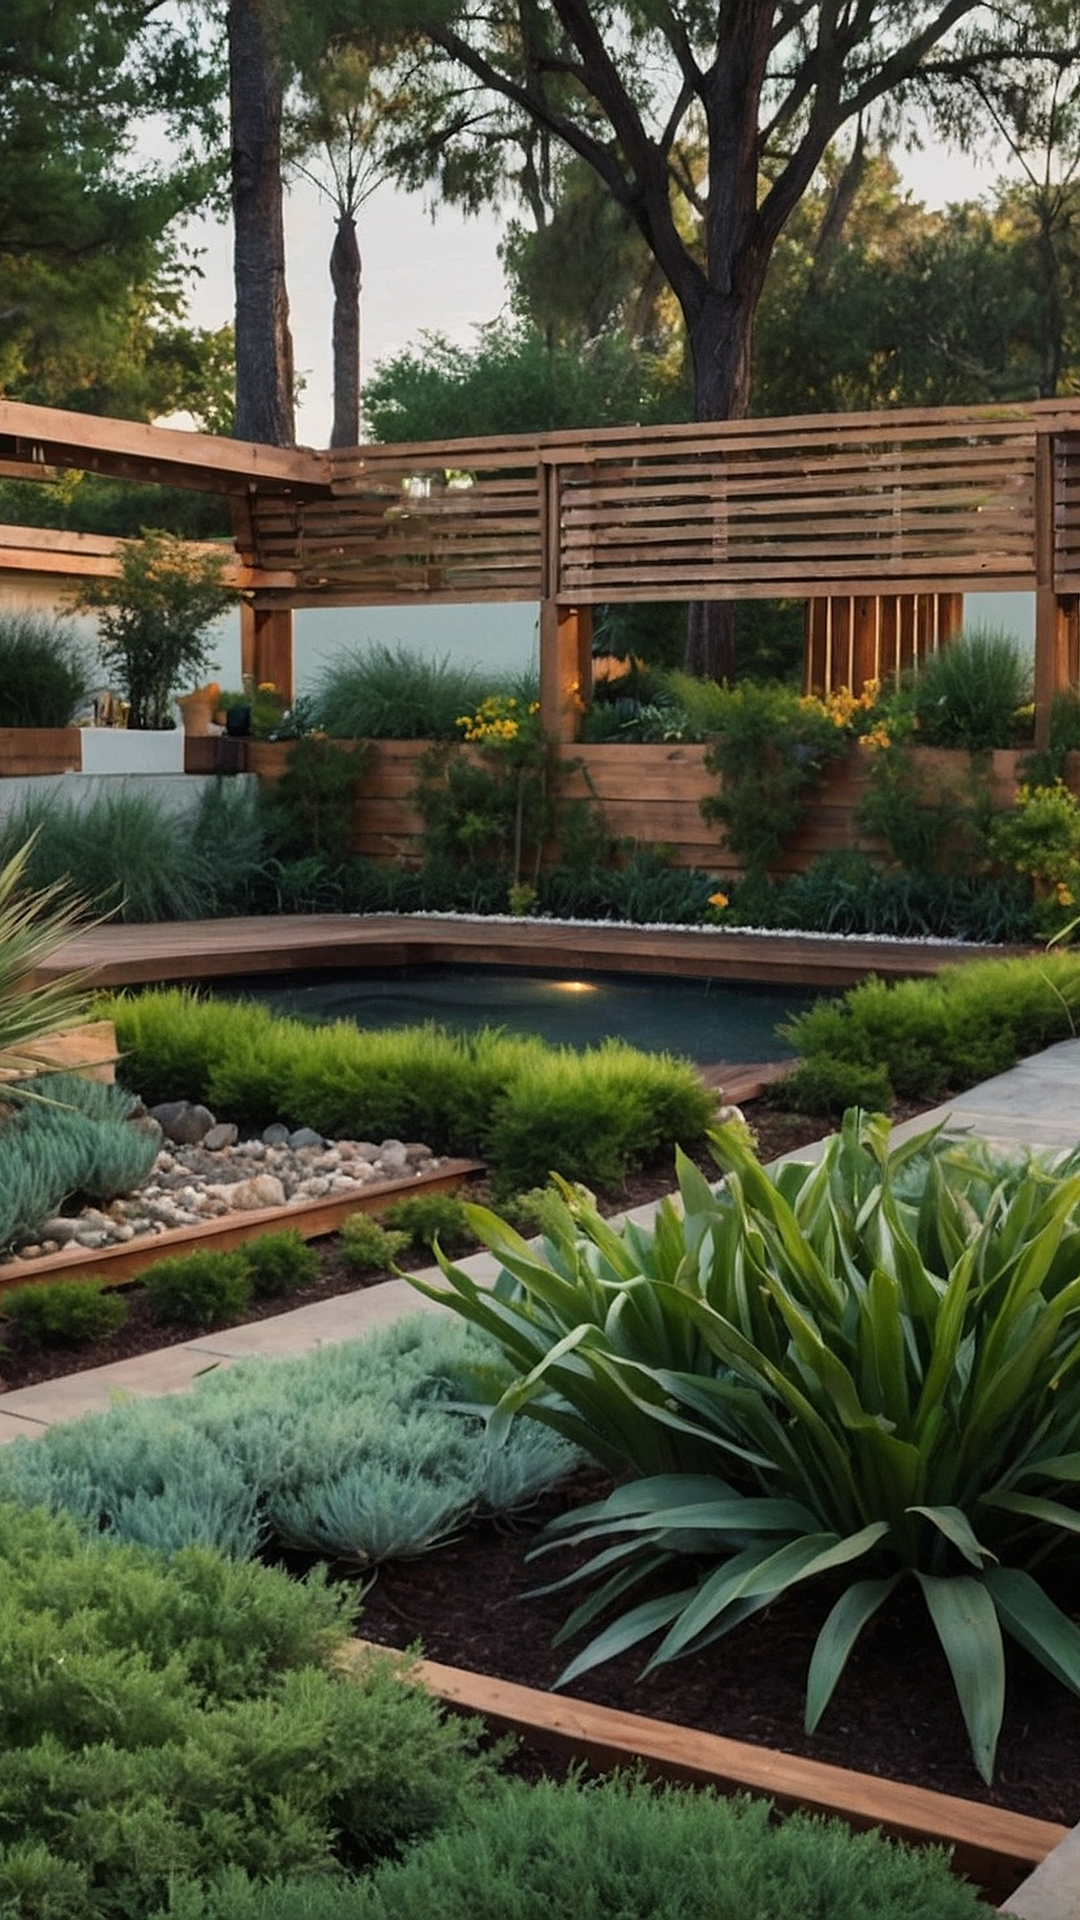 Professionally Designed Landscapes: Inspiration for Your Backyard